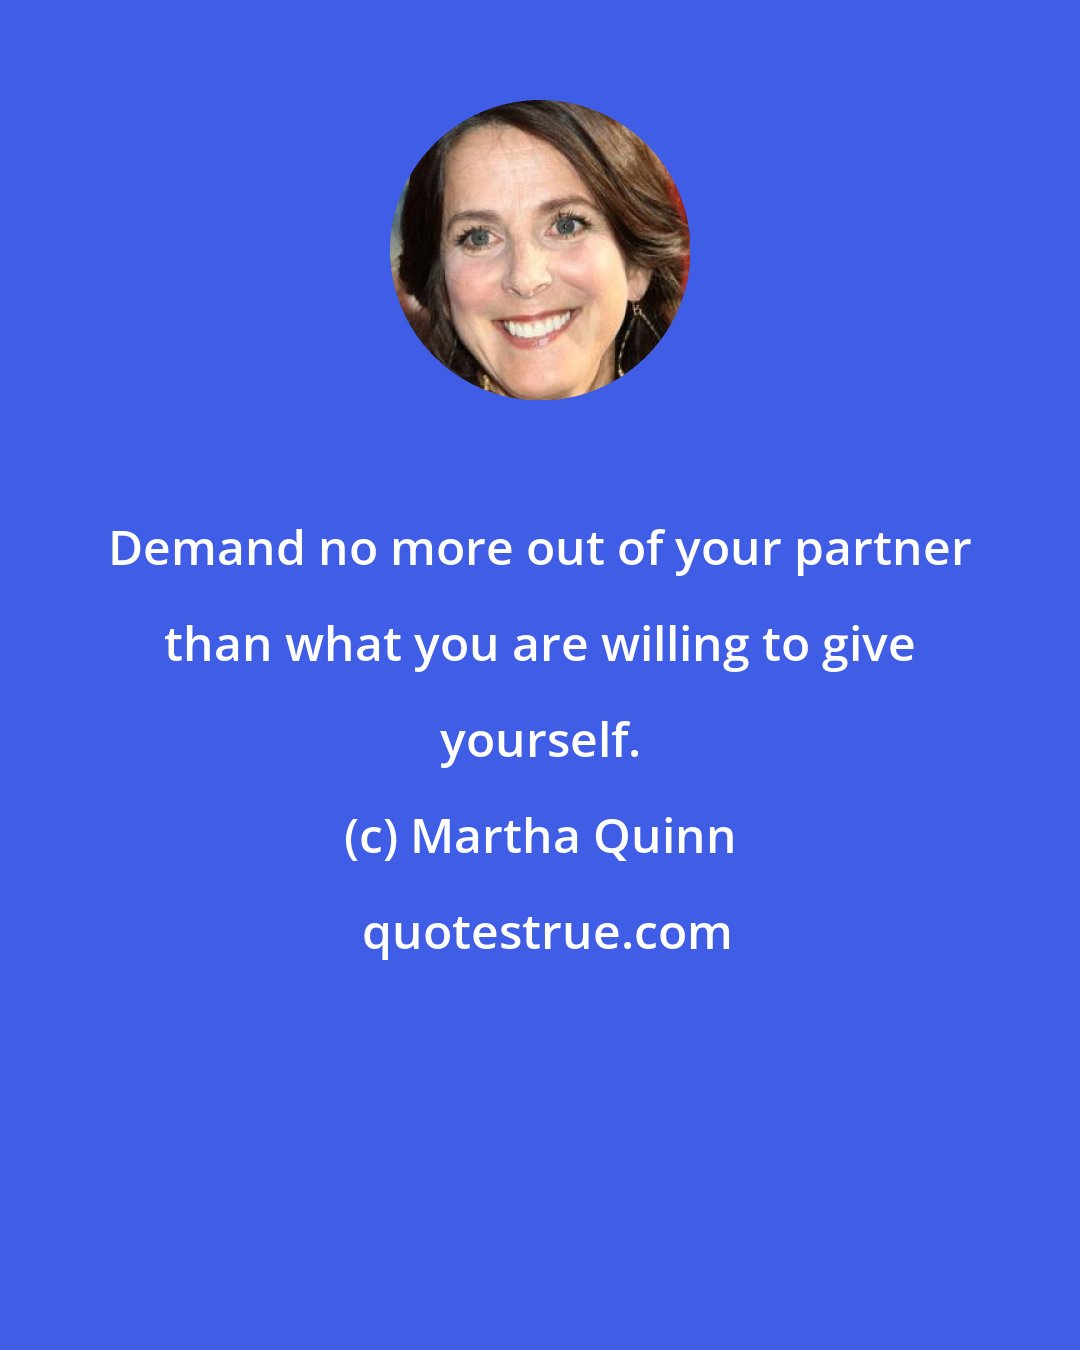 Martha Quinn: Demand no more out of your partner than what you are willing to give yourself.